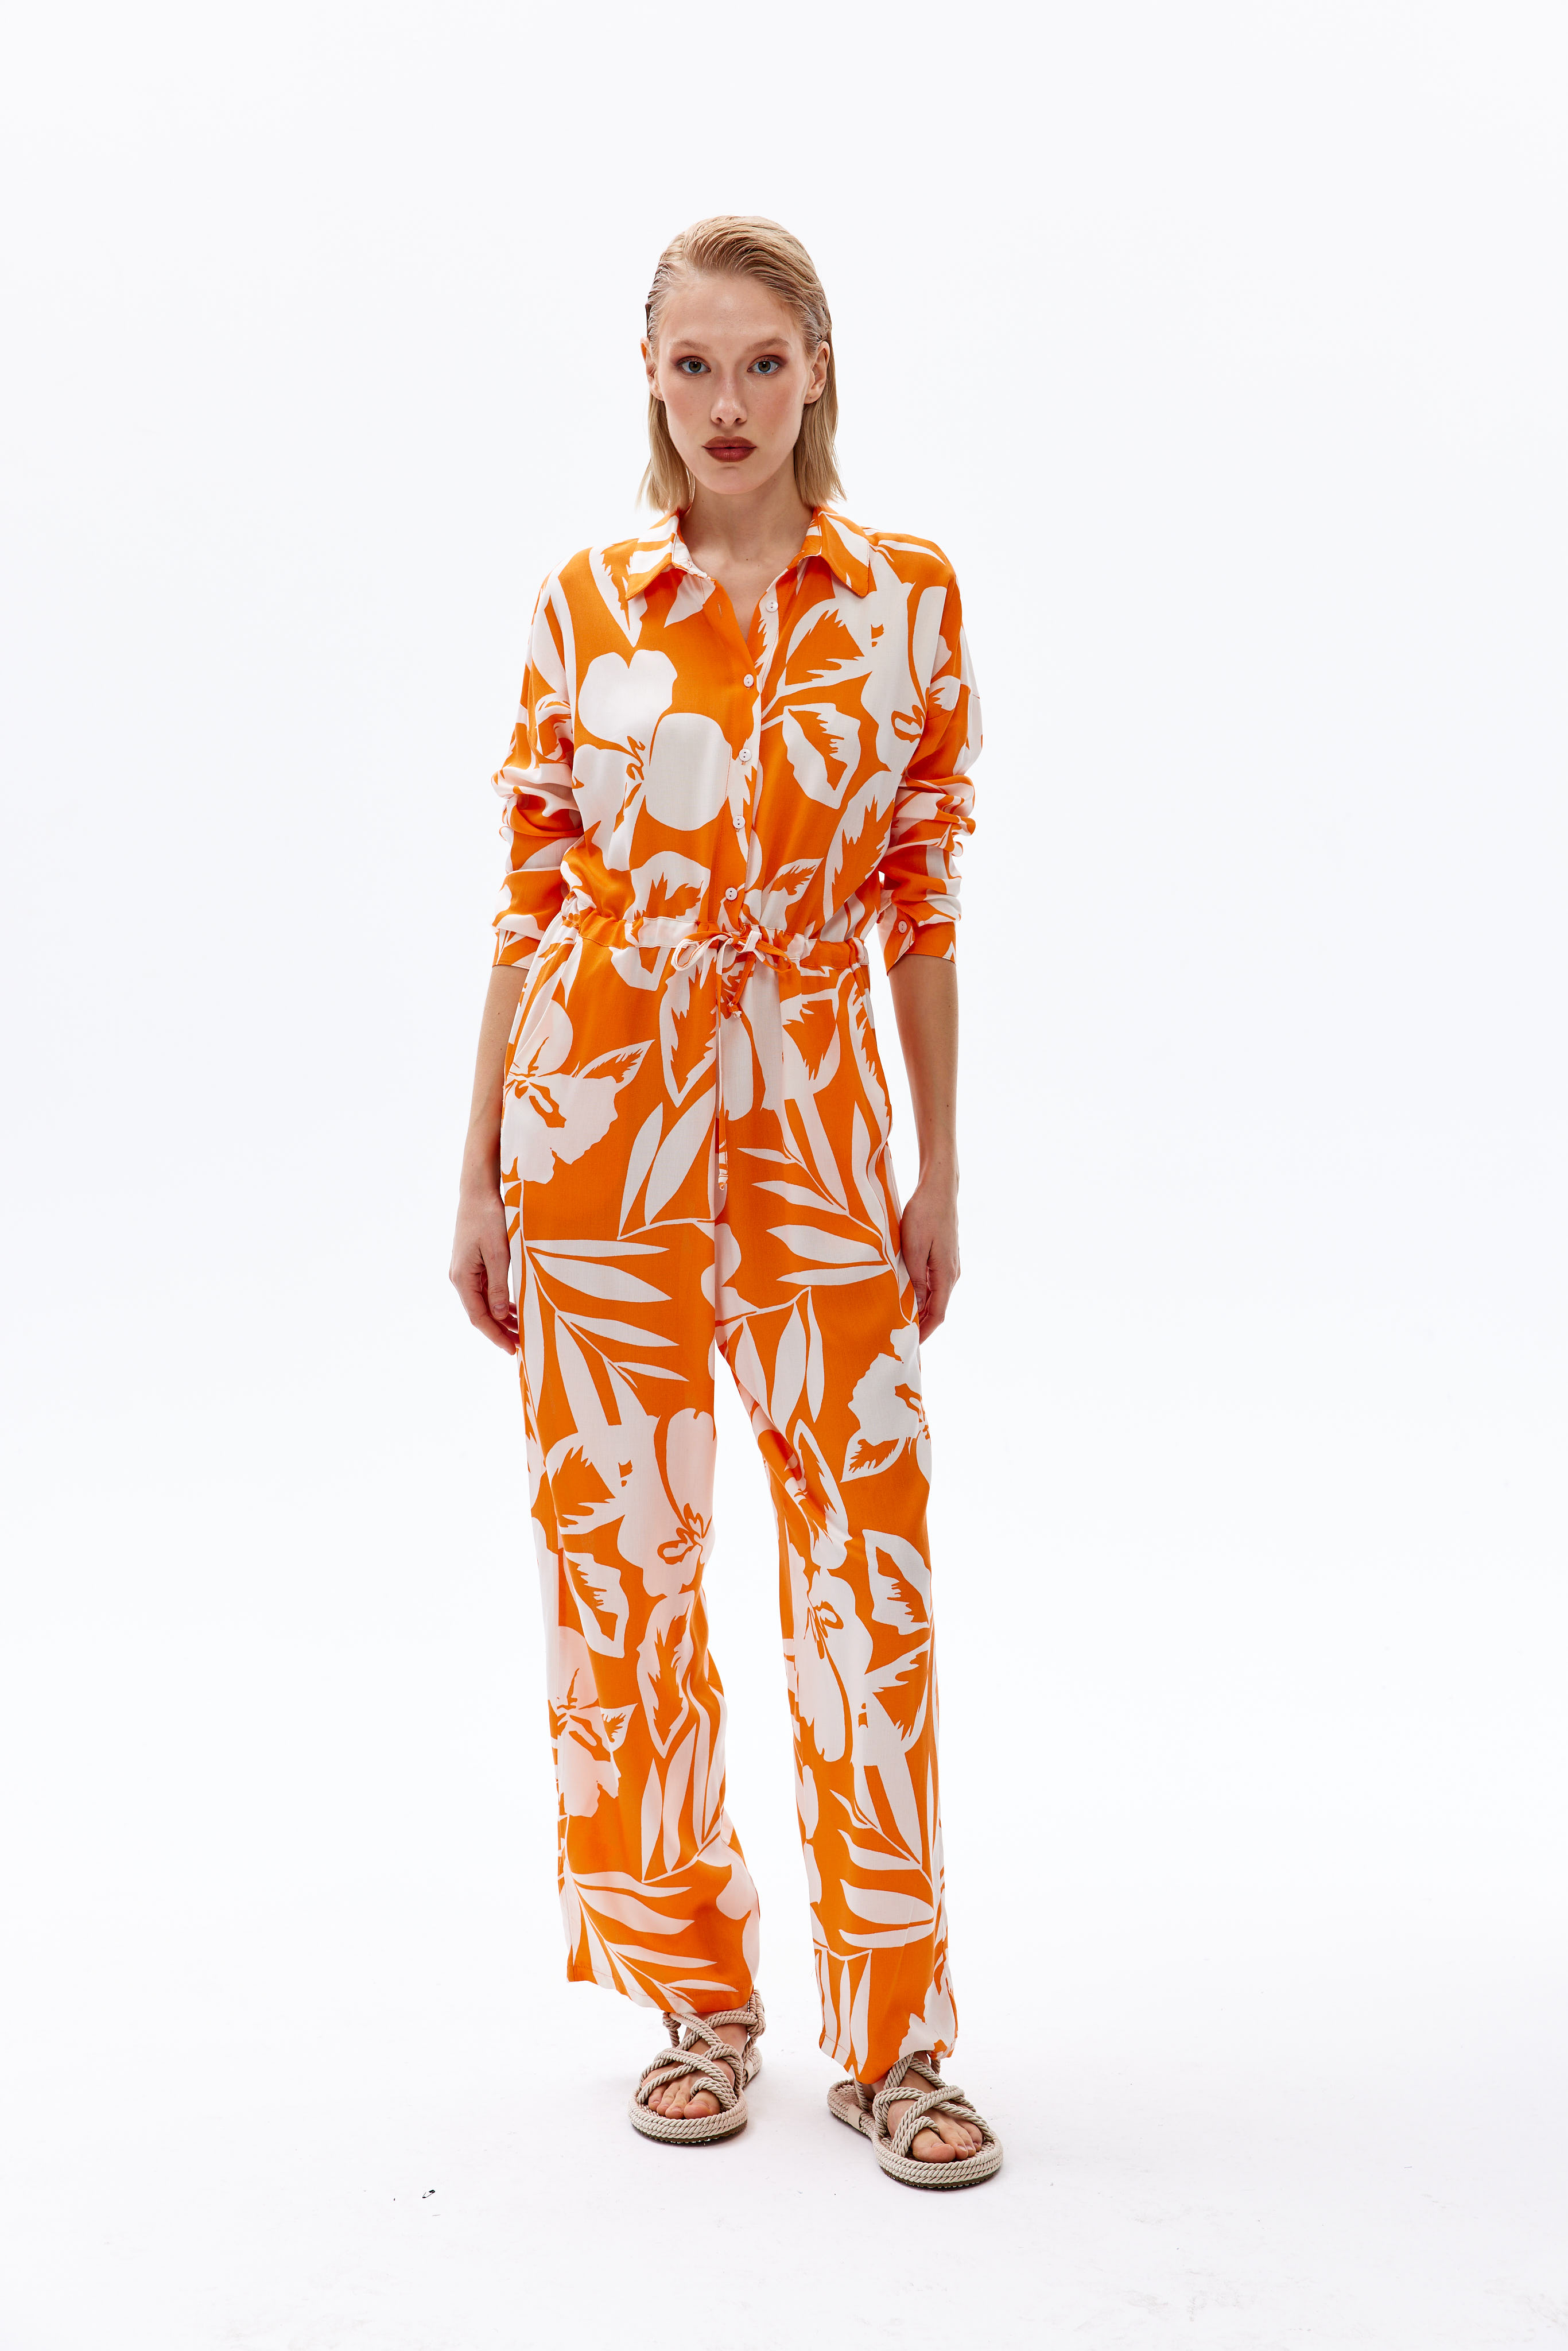 A model wears 44112 - Overalls - Orange, wholesale Jumpsuit of Cream Rouge to display at Lonca